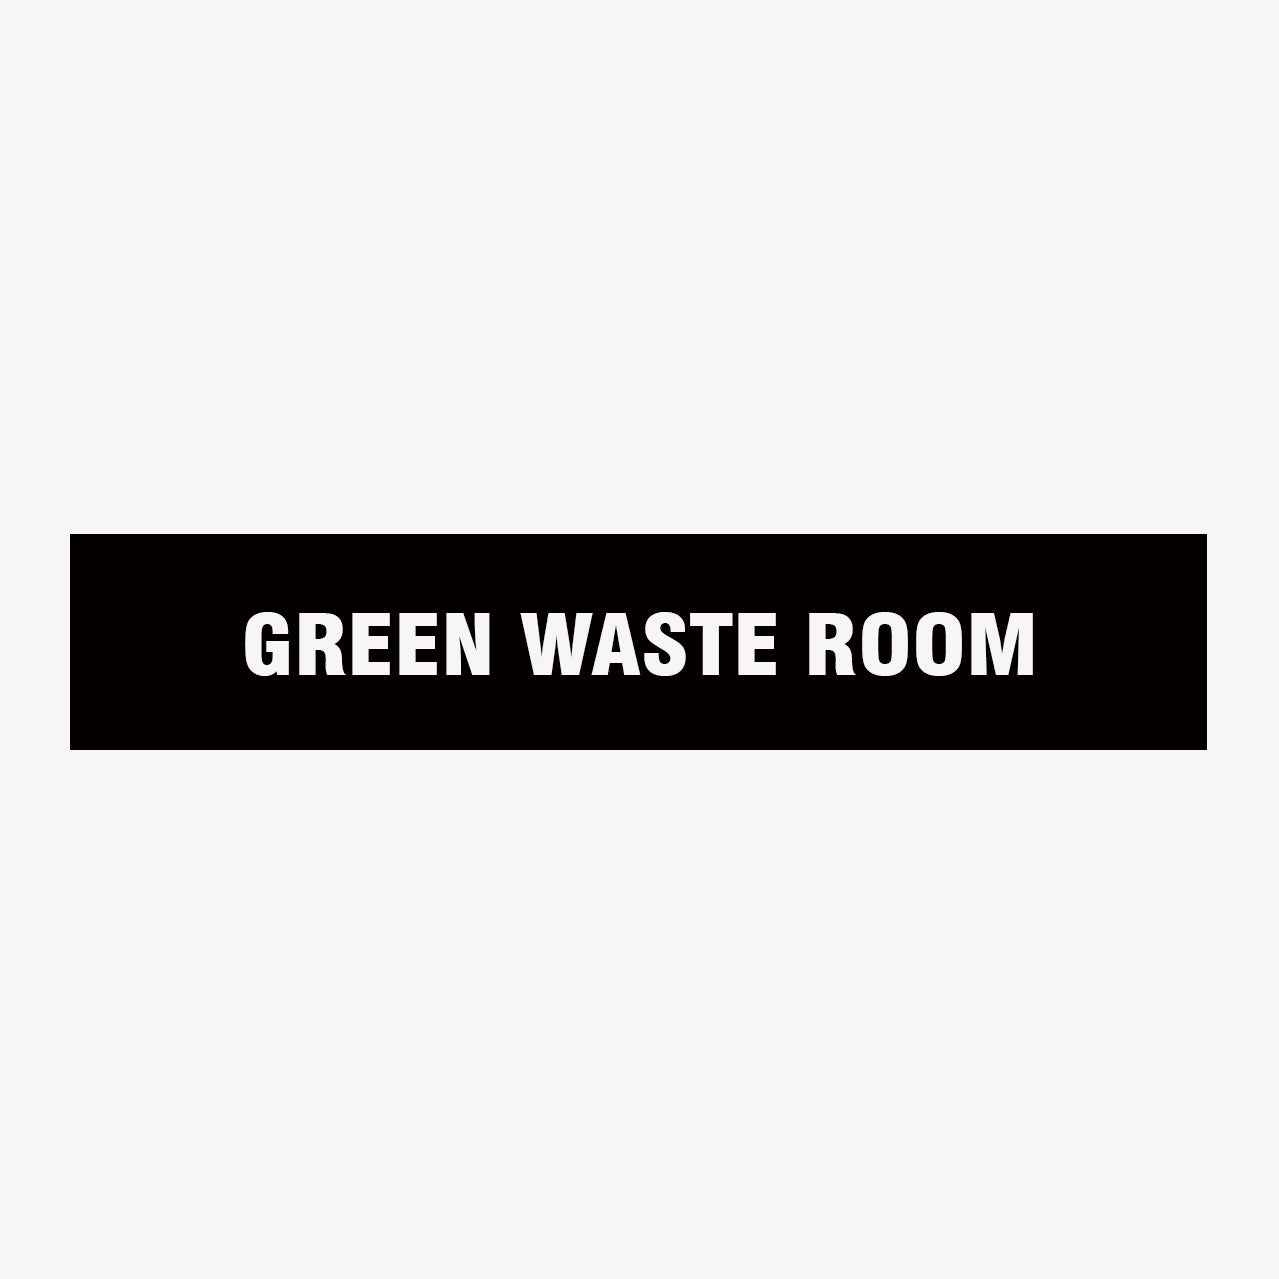 GREEN WASTE ROOM SIGN - STATUTORY SIGNS AT GET SIGNS FAST DELIVERY AROUND AUSTRALIA -  GET SIGNS ONLINE AT GET SIGNS